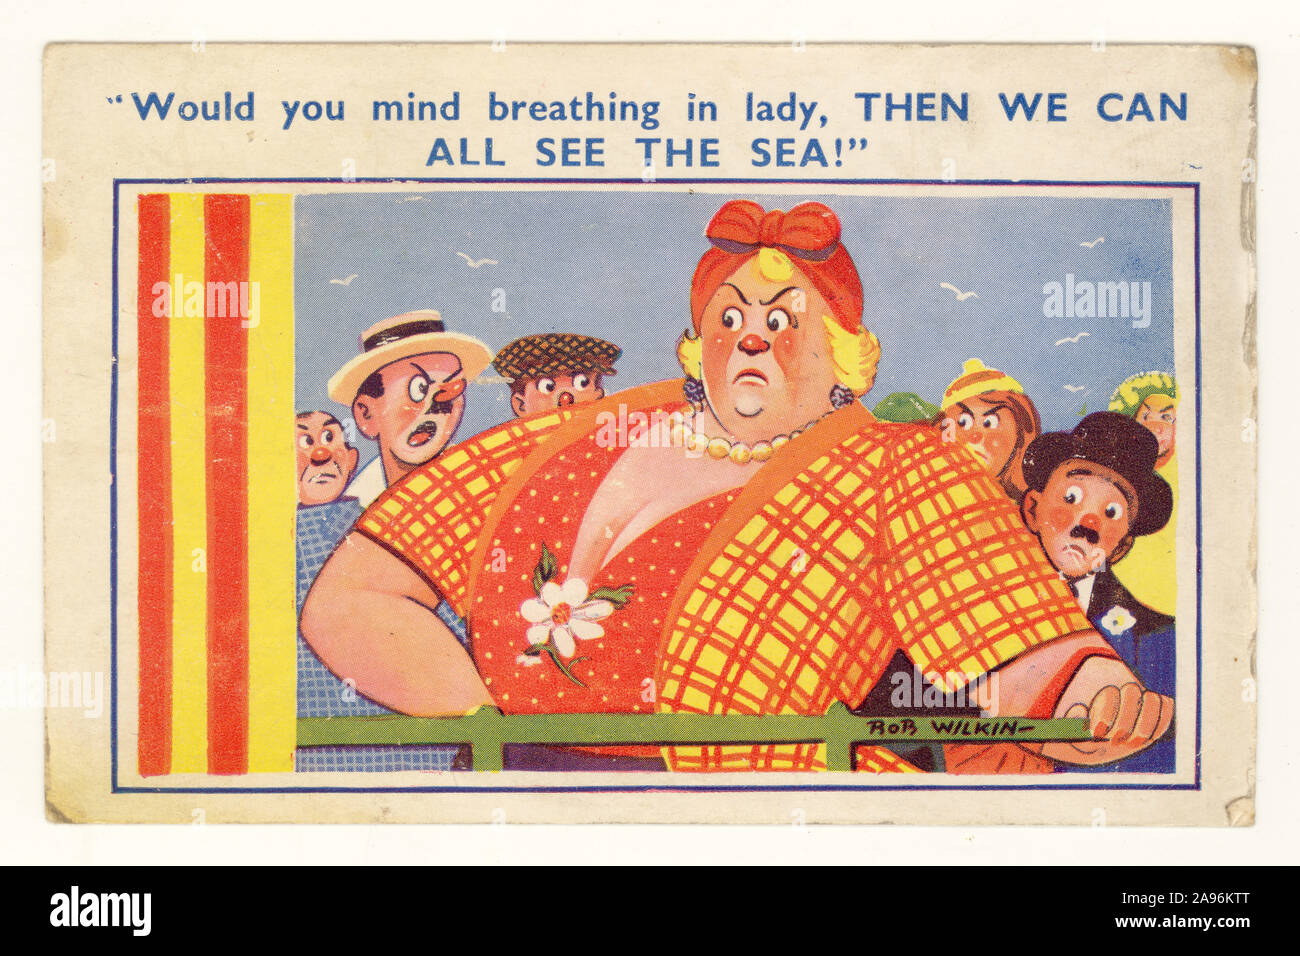 Early 1900's comic seaside postcard of fat lady blocking view to the sea, circa 1930's or 1940's, by Rob Wilkin, British artist, U.K. Stock Photo